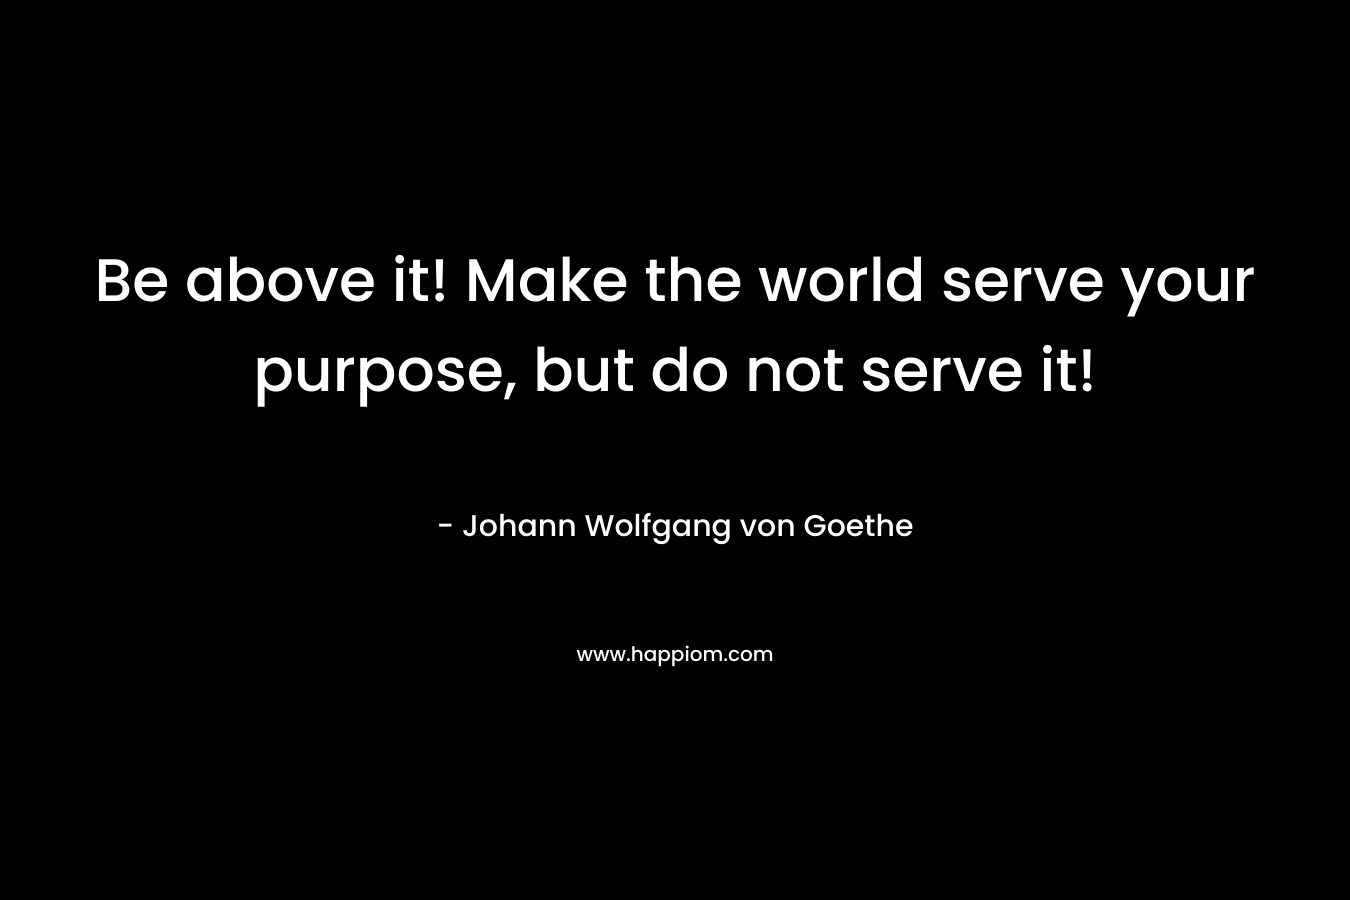 Be above it! Make the world serve your purpose, but do not serve it!